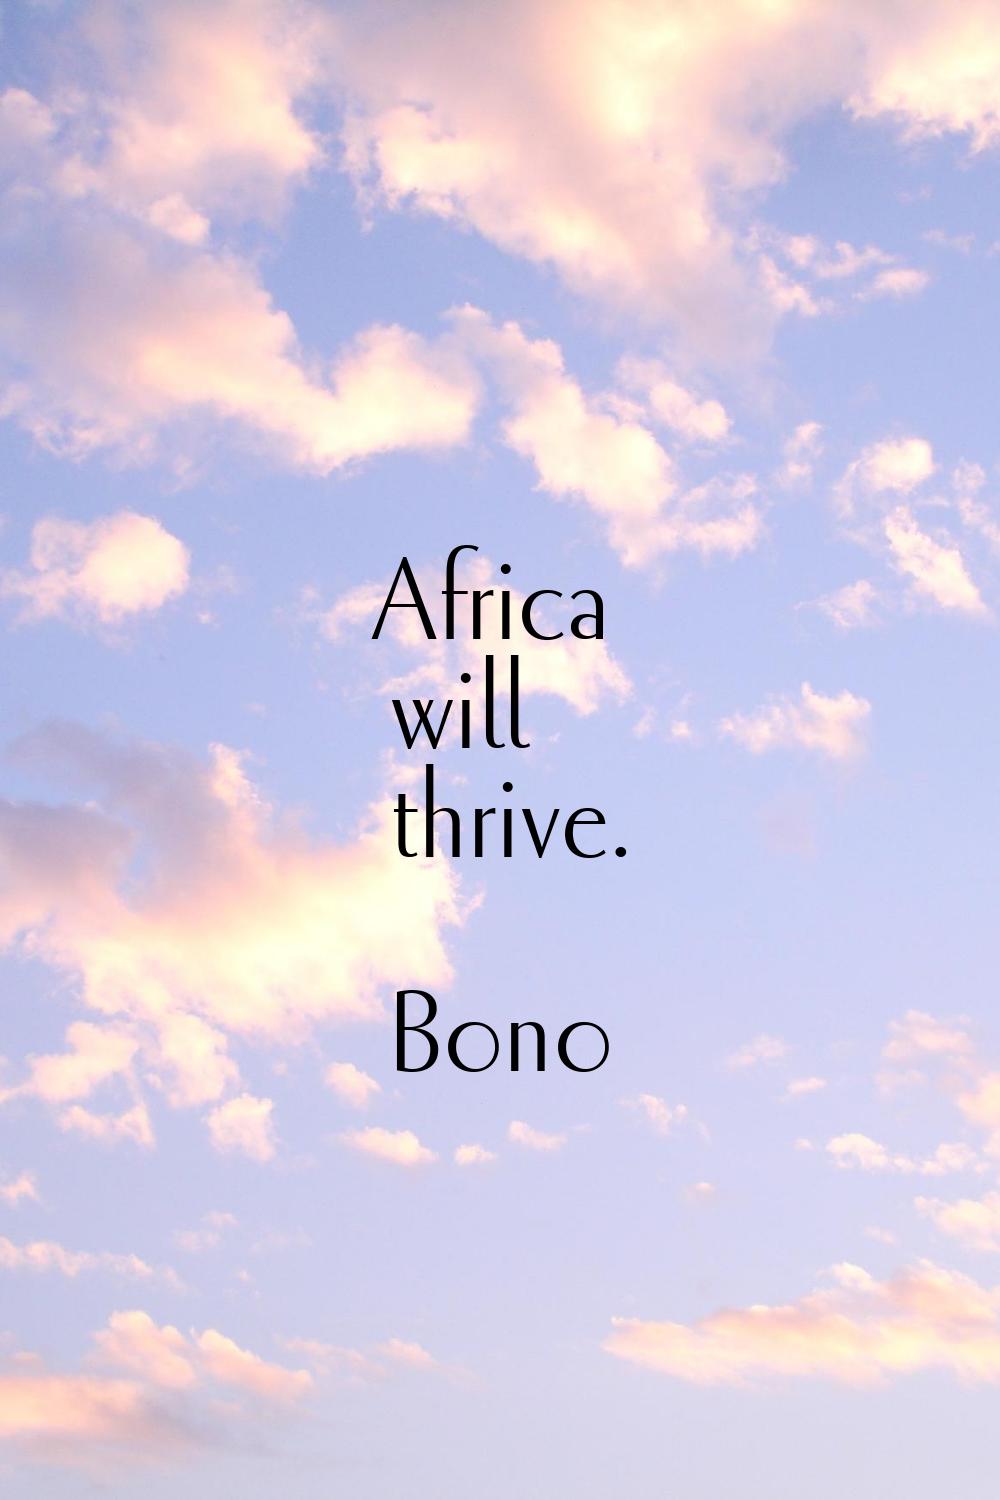 Africa will thrive.